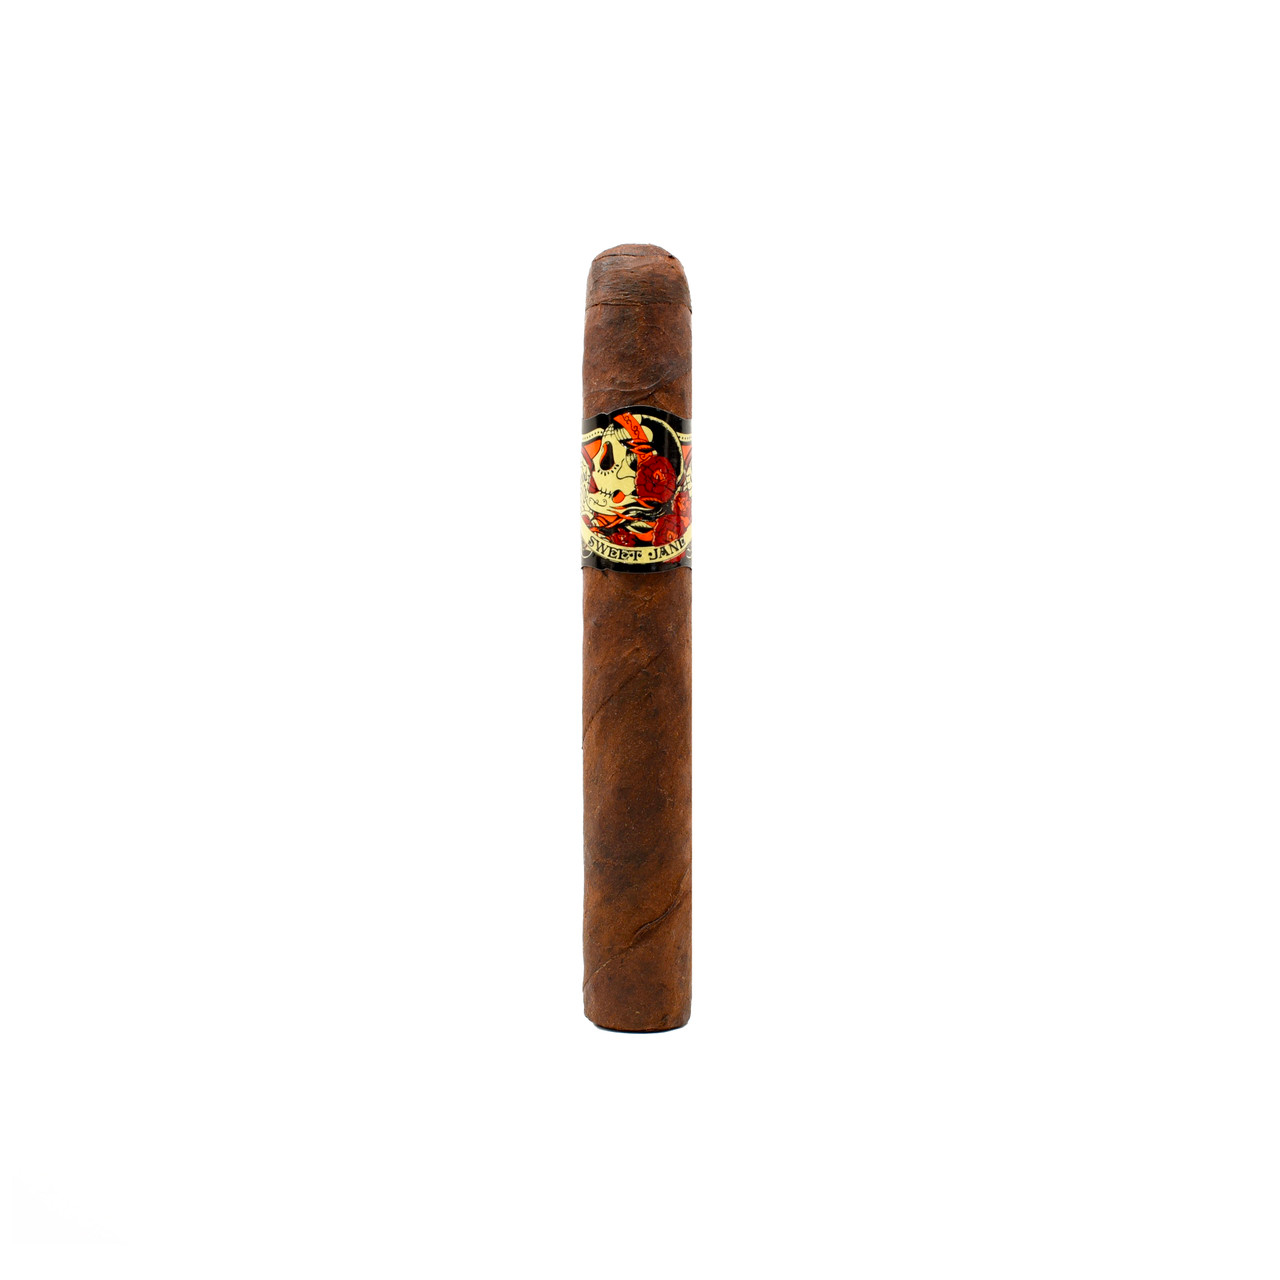 A maduro wrapper cigar from Sweet Jane